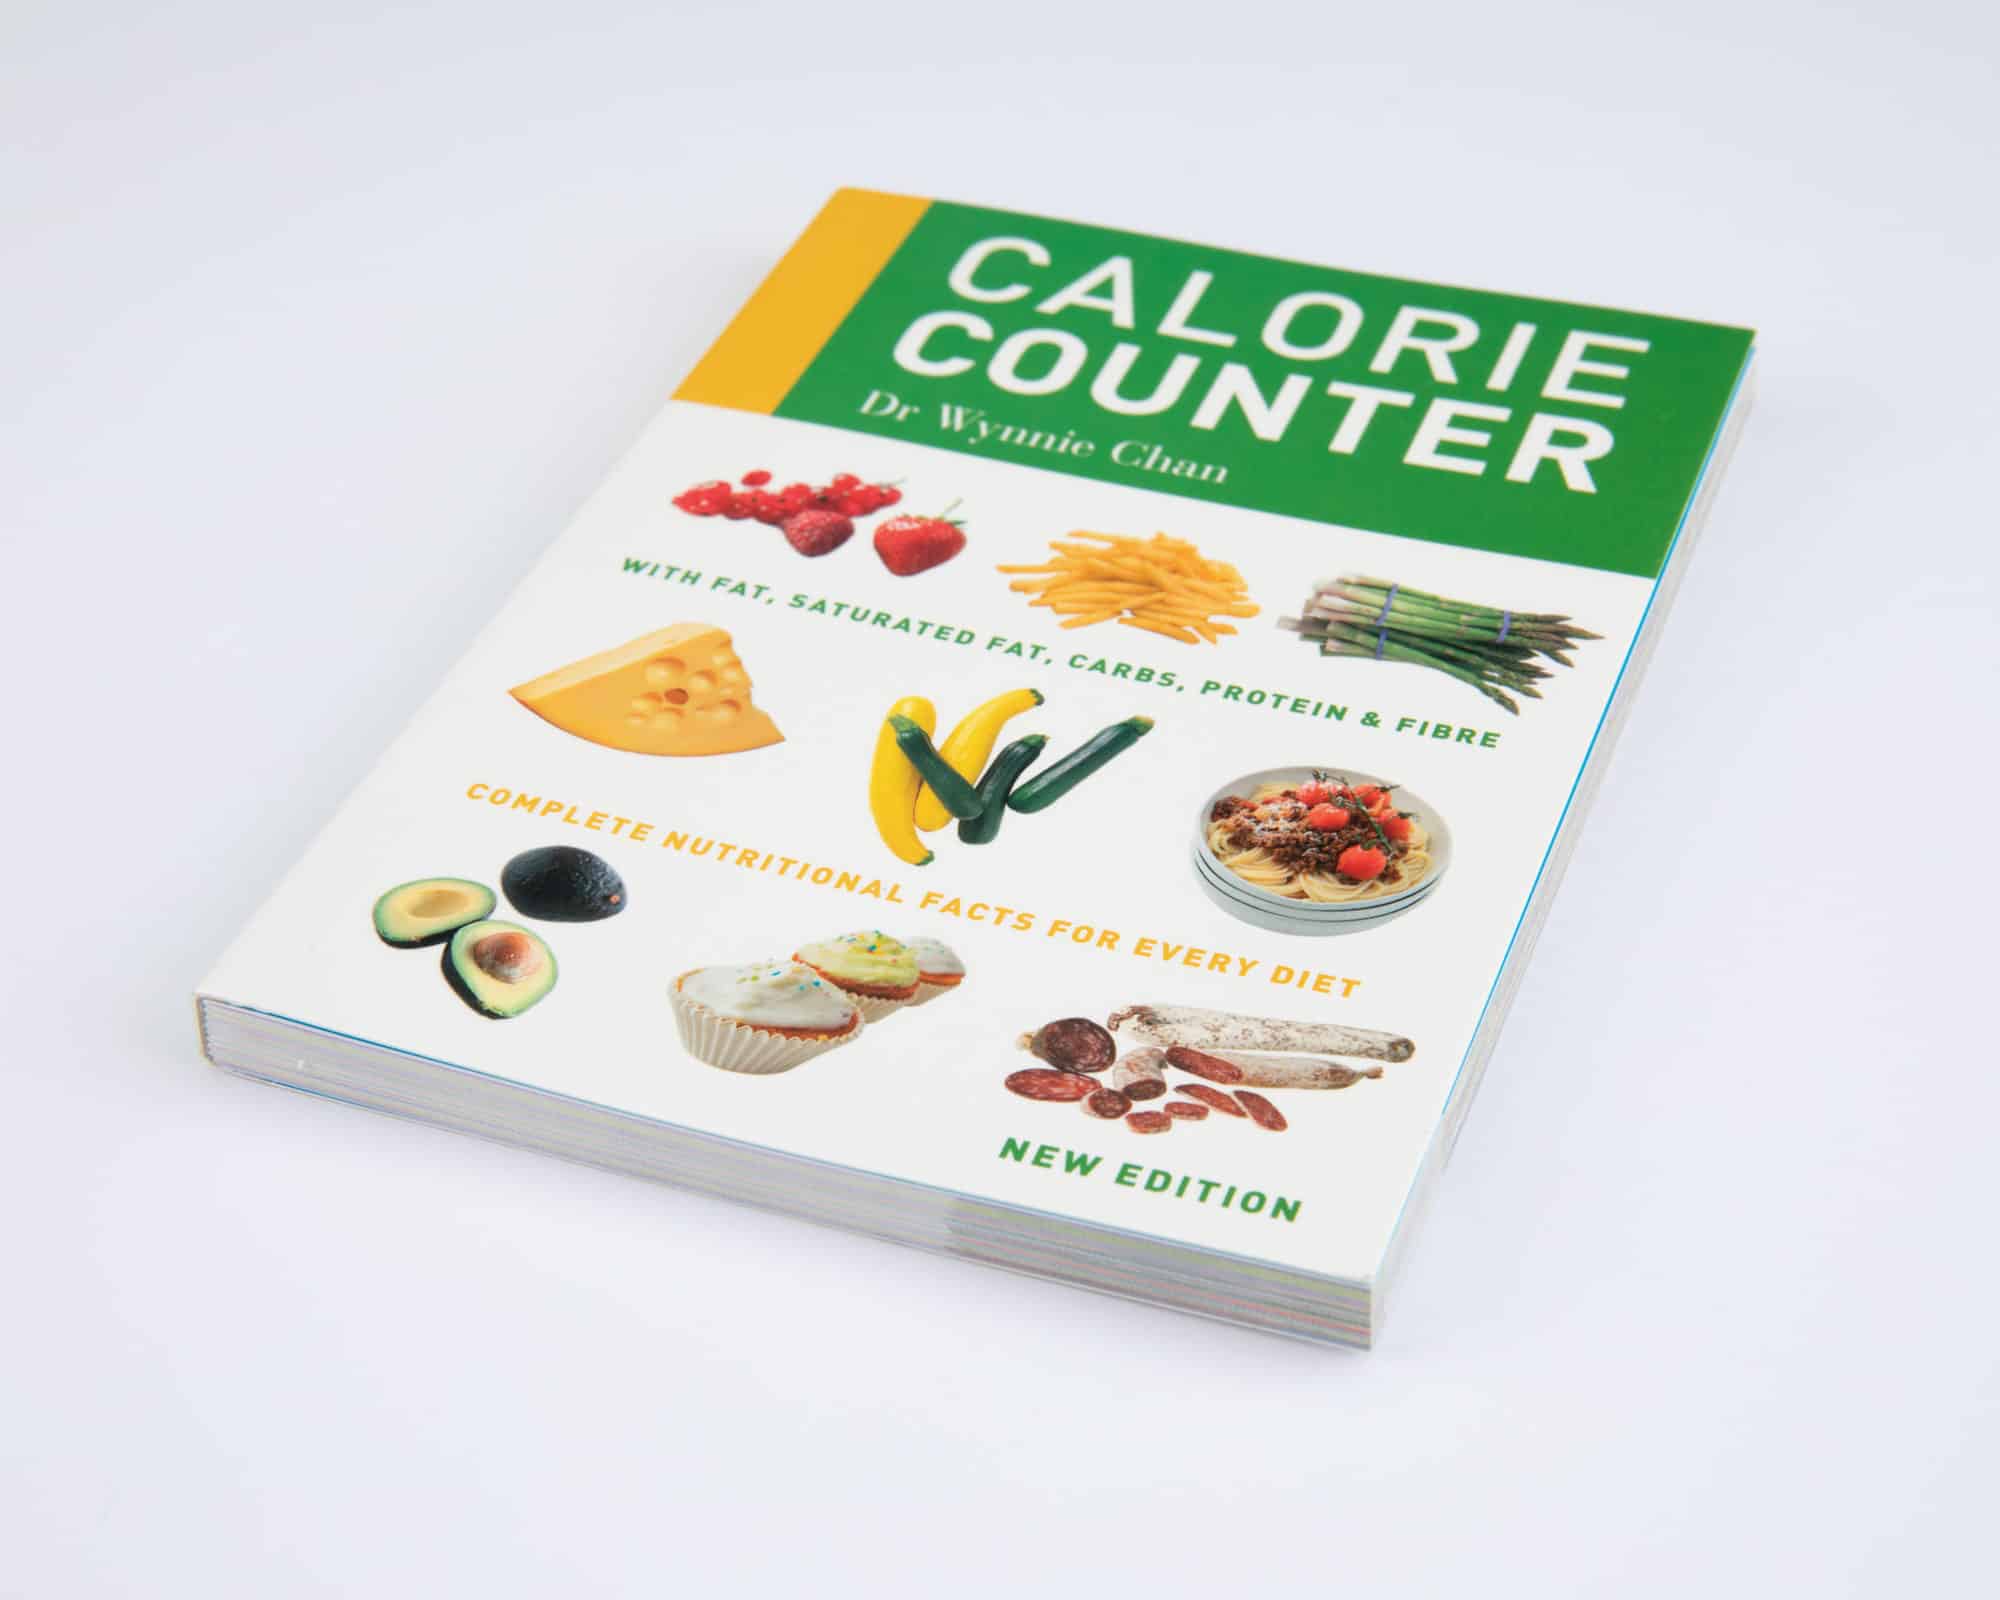 Calorie Counter eBook — The Nutrition Experts